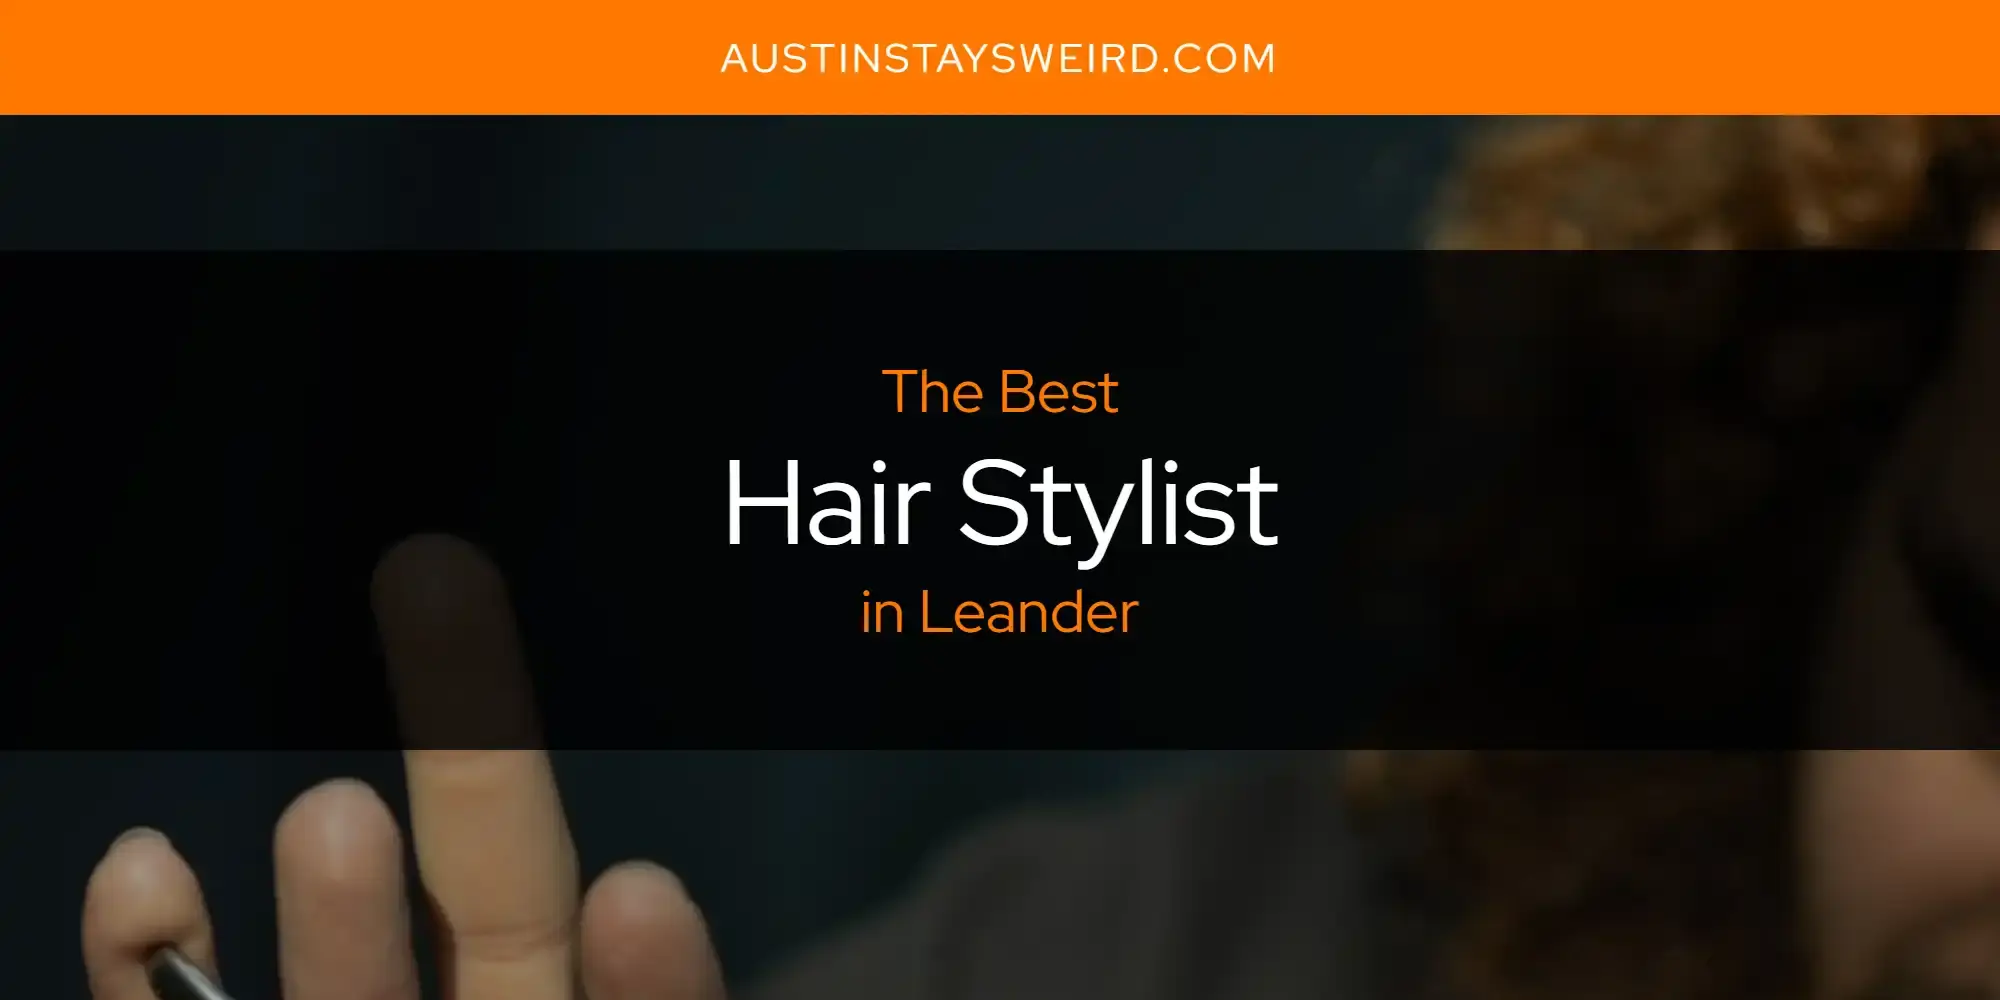 Best Hair Stylist in Leander? Here's the Top 8